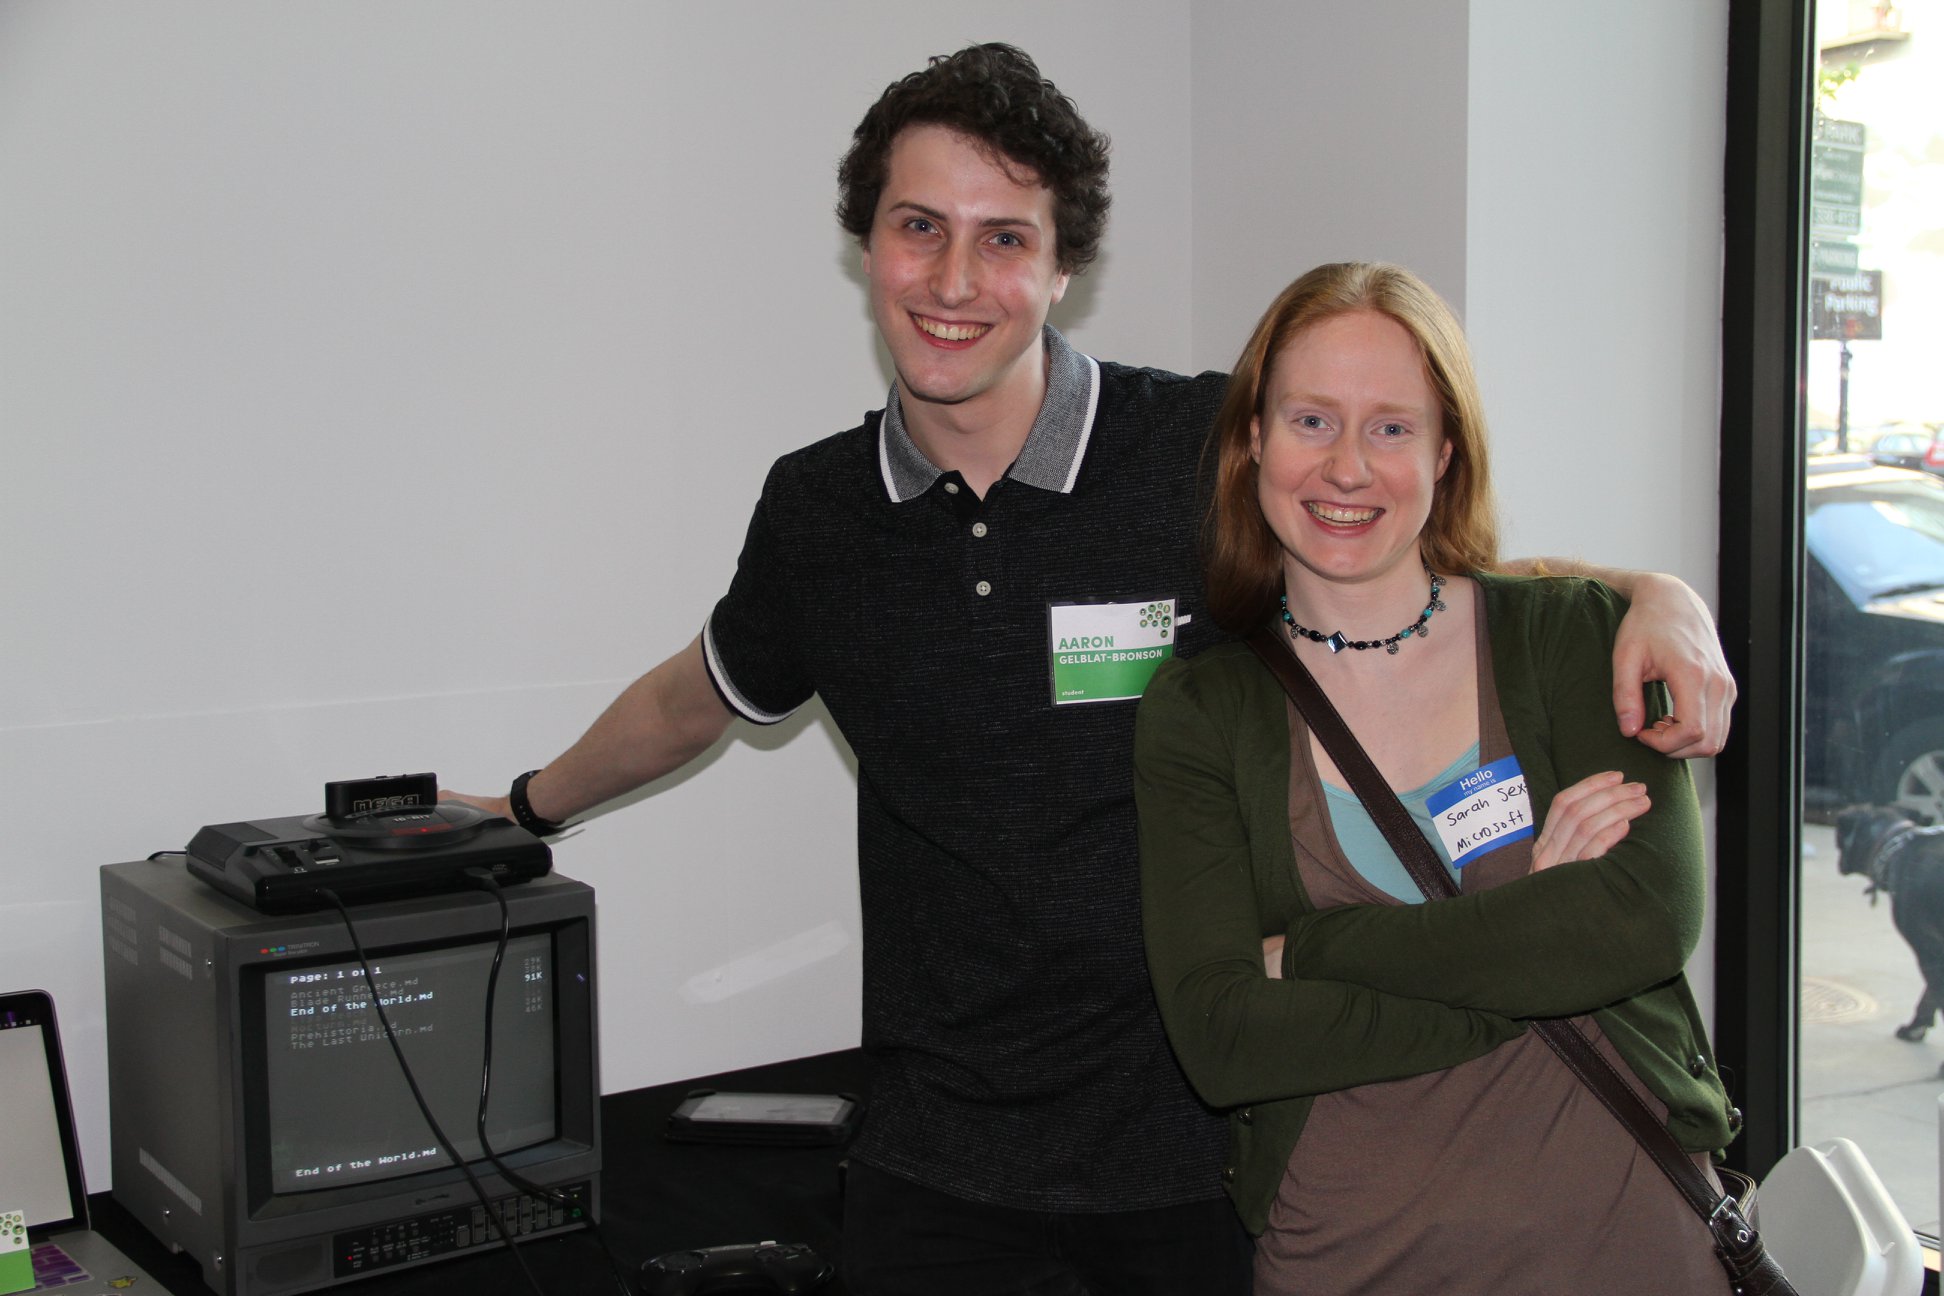 Photograph of student and Microsoft's Sarah Sexton at IAM's Industry Night (Columbia College Chicago)